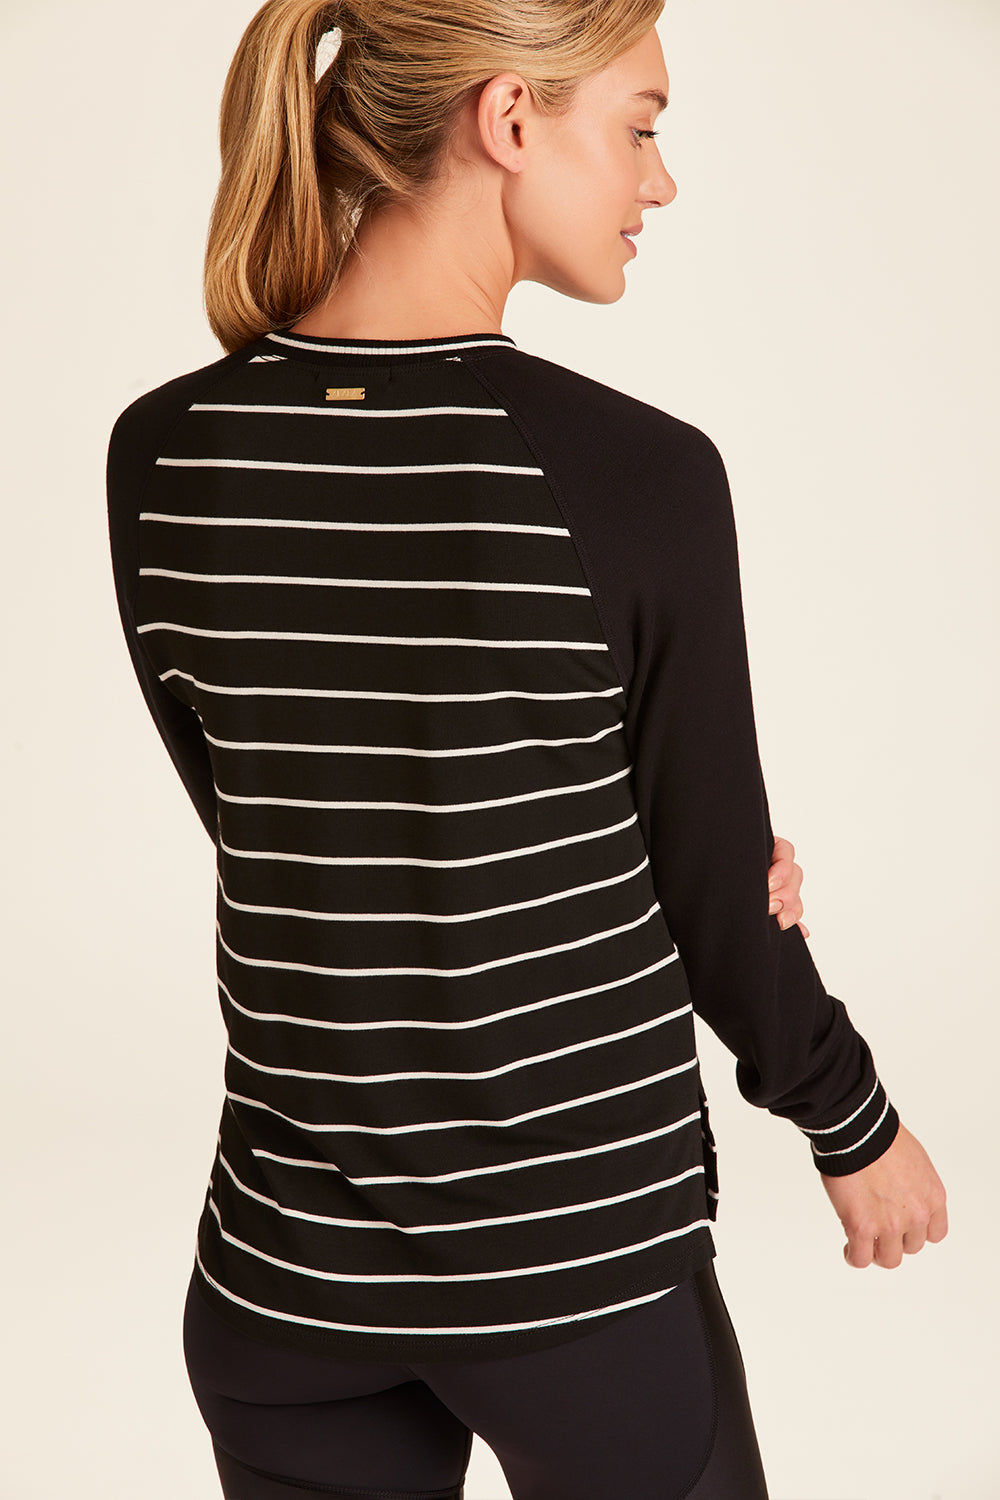 Back view of Alala Luxury Women's Athleisure breeze sweatshirt in black and white